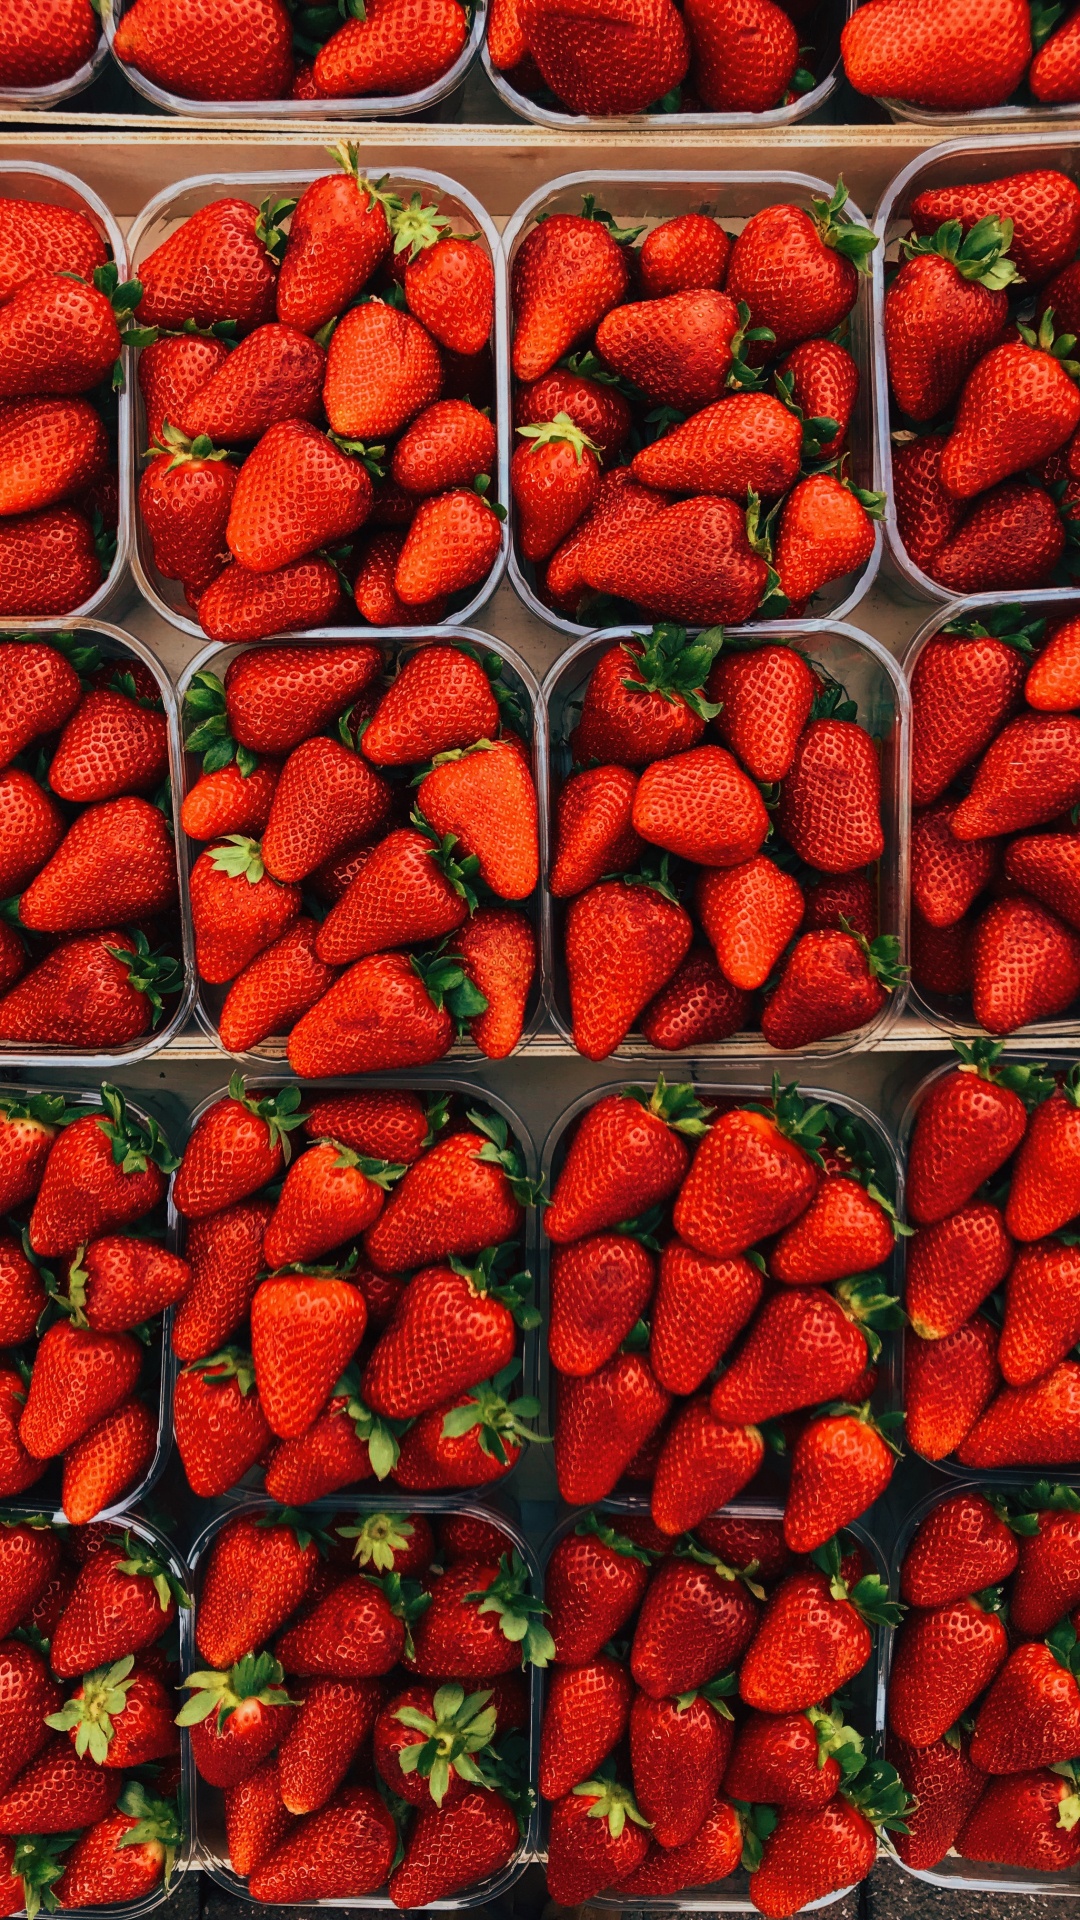 Red Strawberries on Green Plastic Container. Wallpaper in 1080x1920 Resolution